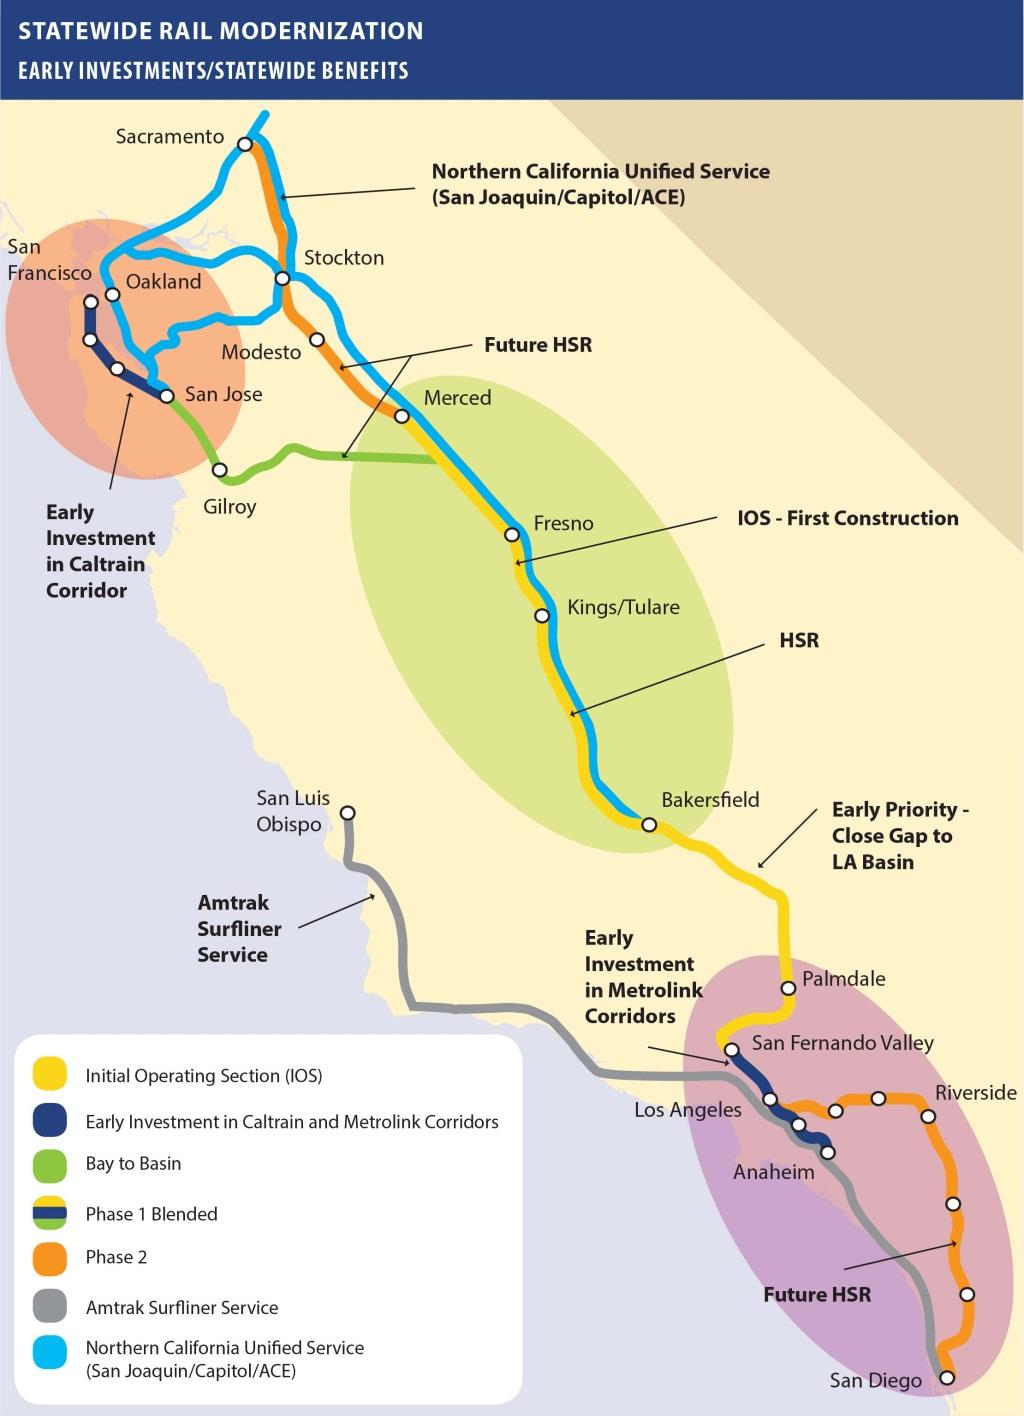 A STATEWIDE RAIL MODERNIZATION PLAN Connects to Existing Systems Phase I Blended: San Francisco to Los Angeles/ Anaheim 520 miles San